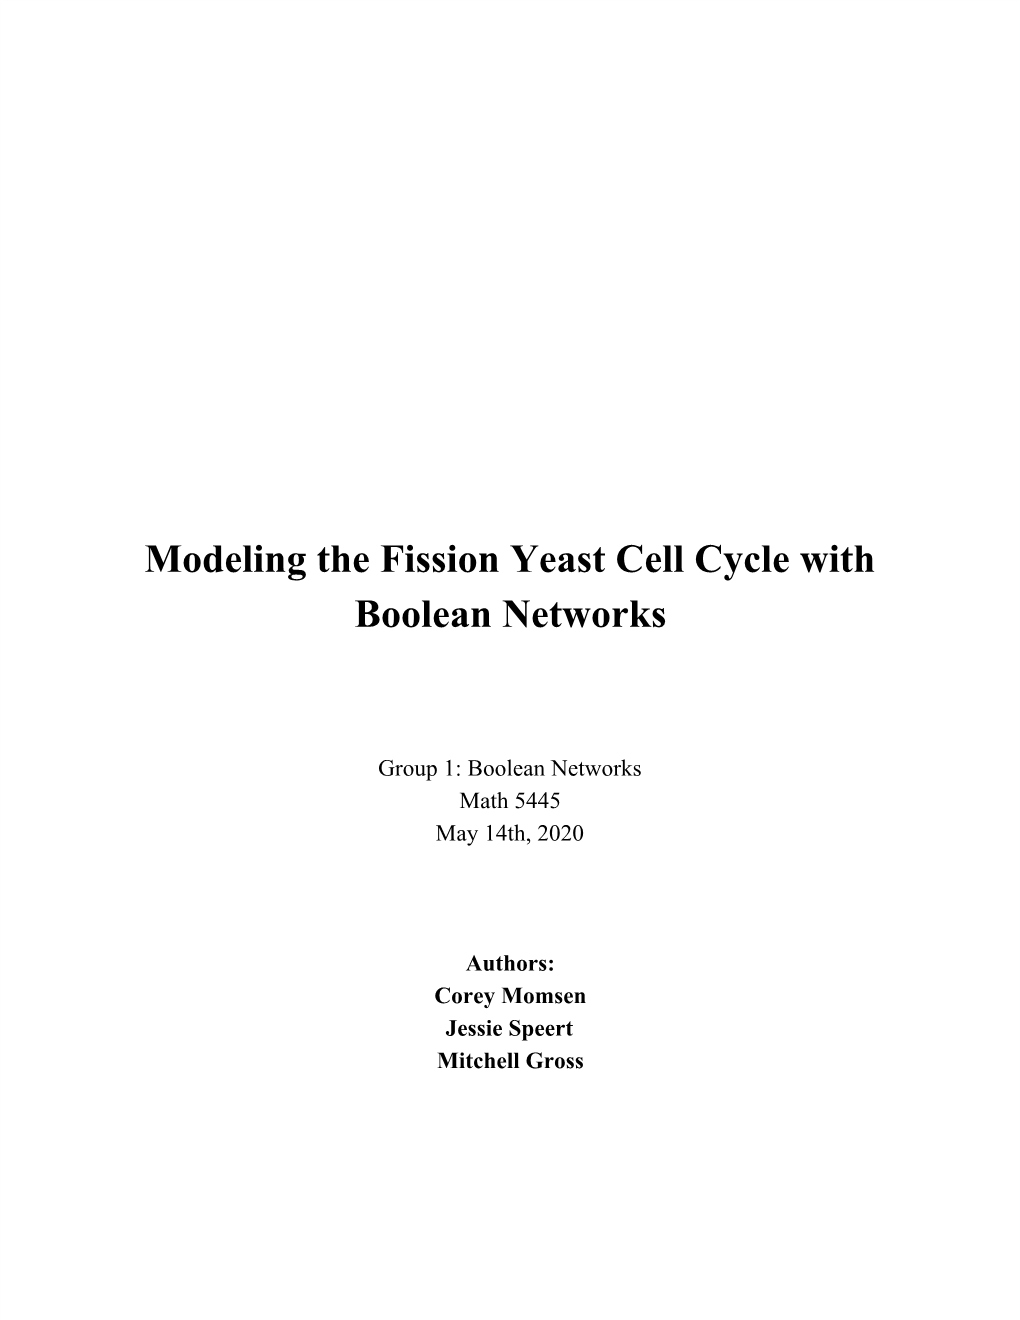 Modeling the Fission Yeast Cell Cycle with Boolean Networks